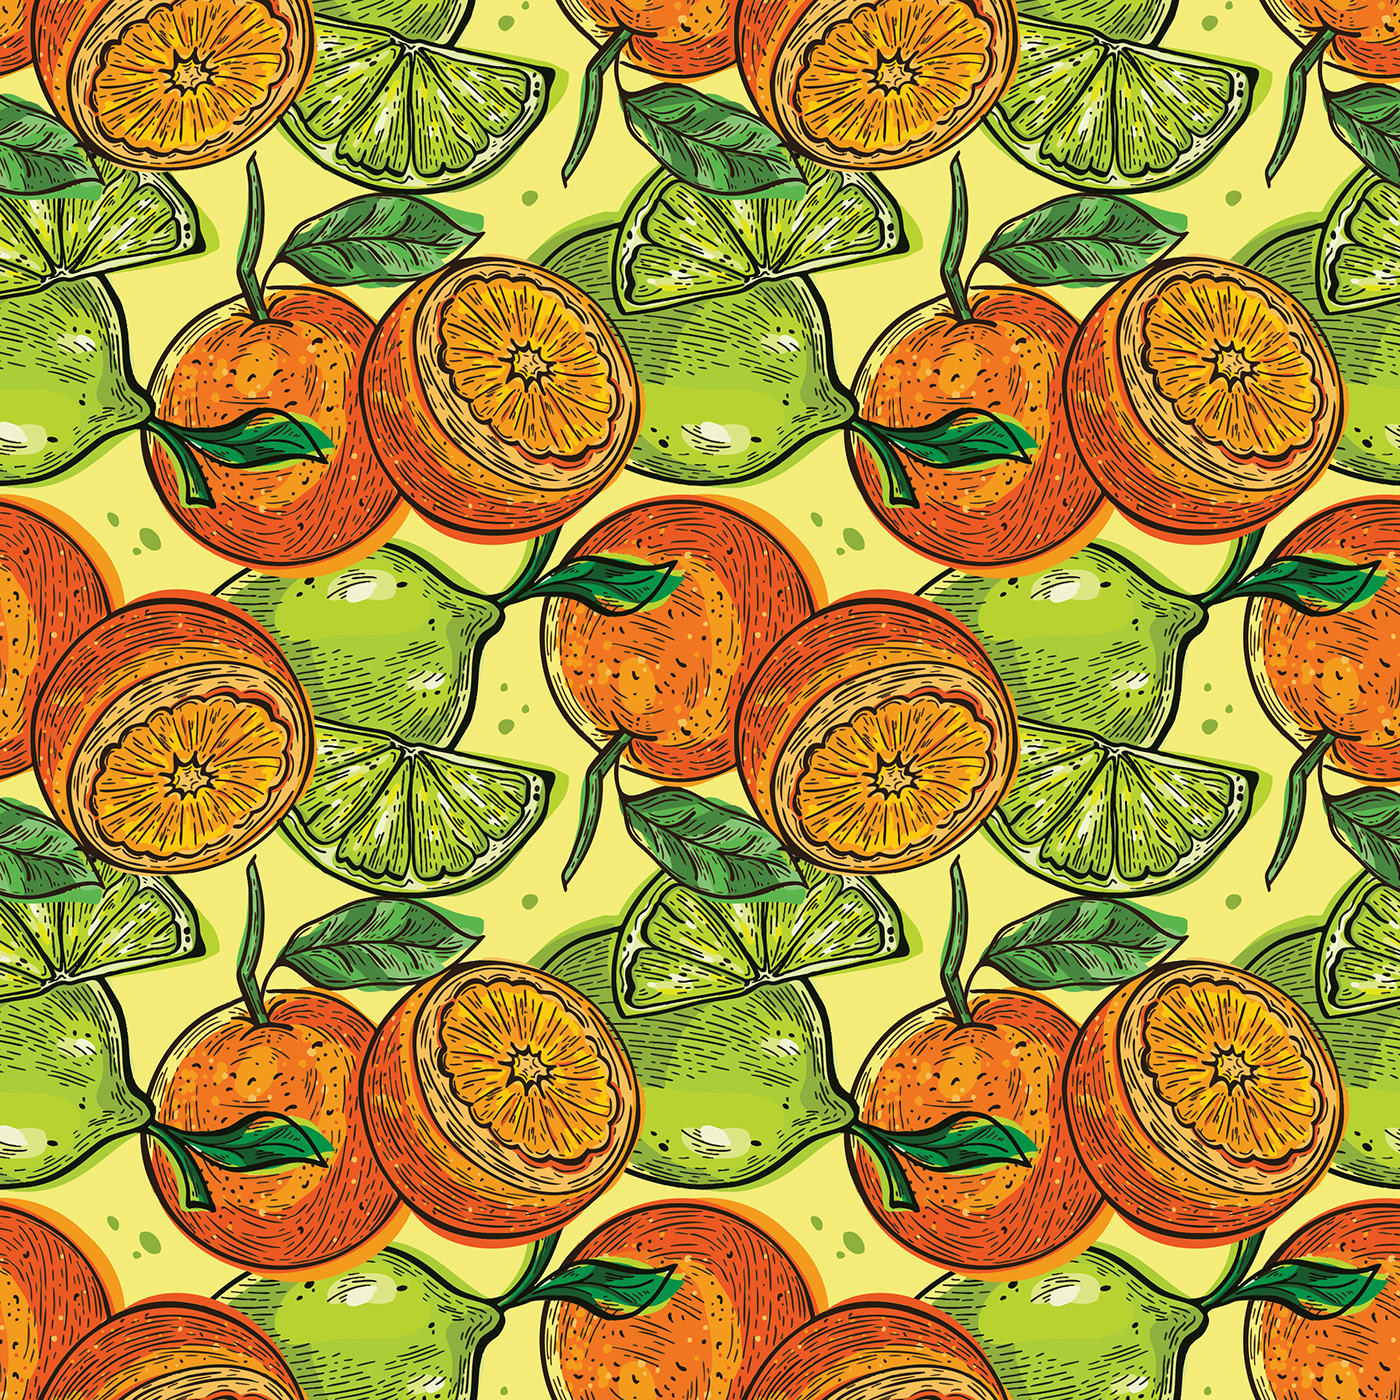 Repeat pattern of orange and lime illustrations in a bright colorful pattern. Textile pattern design